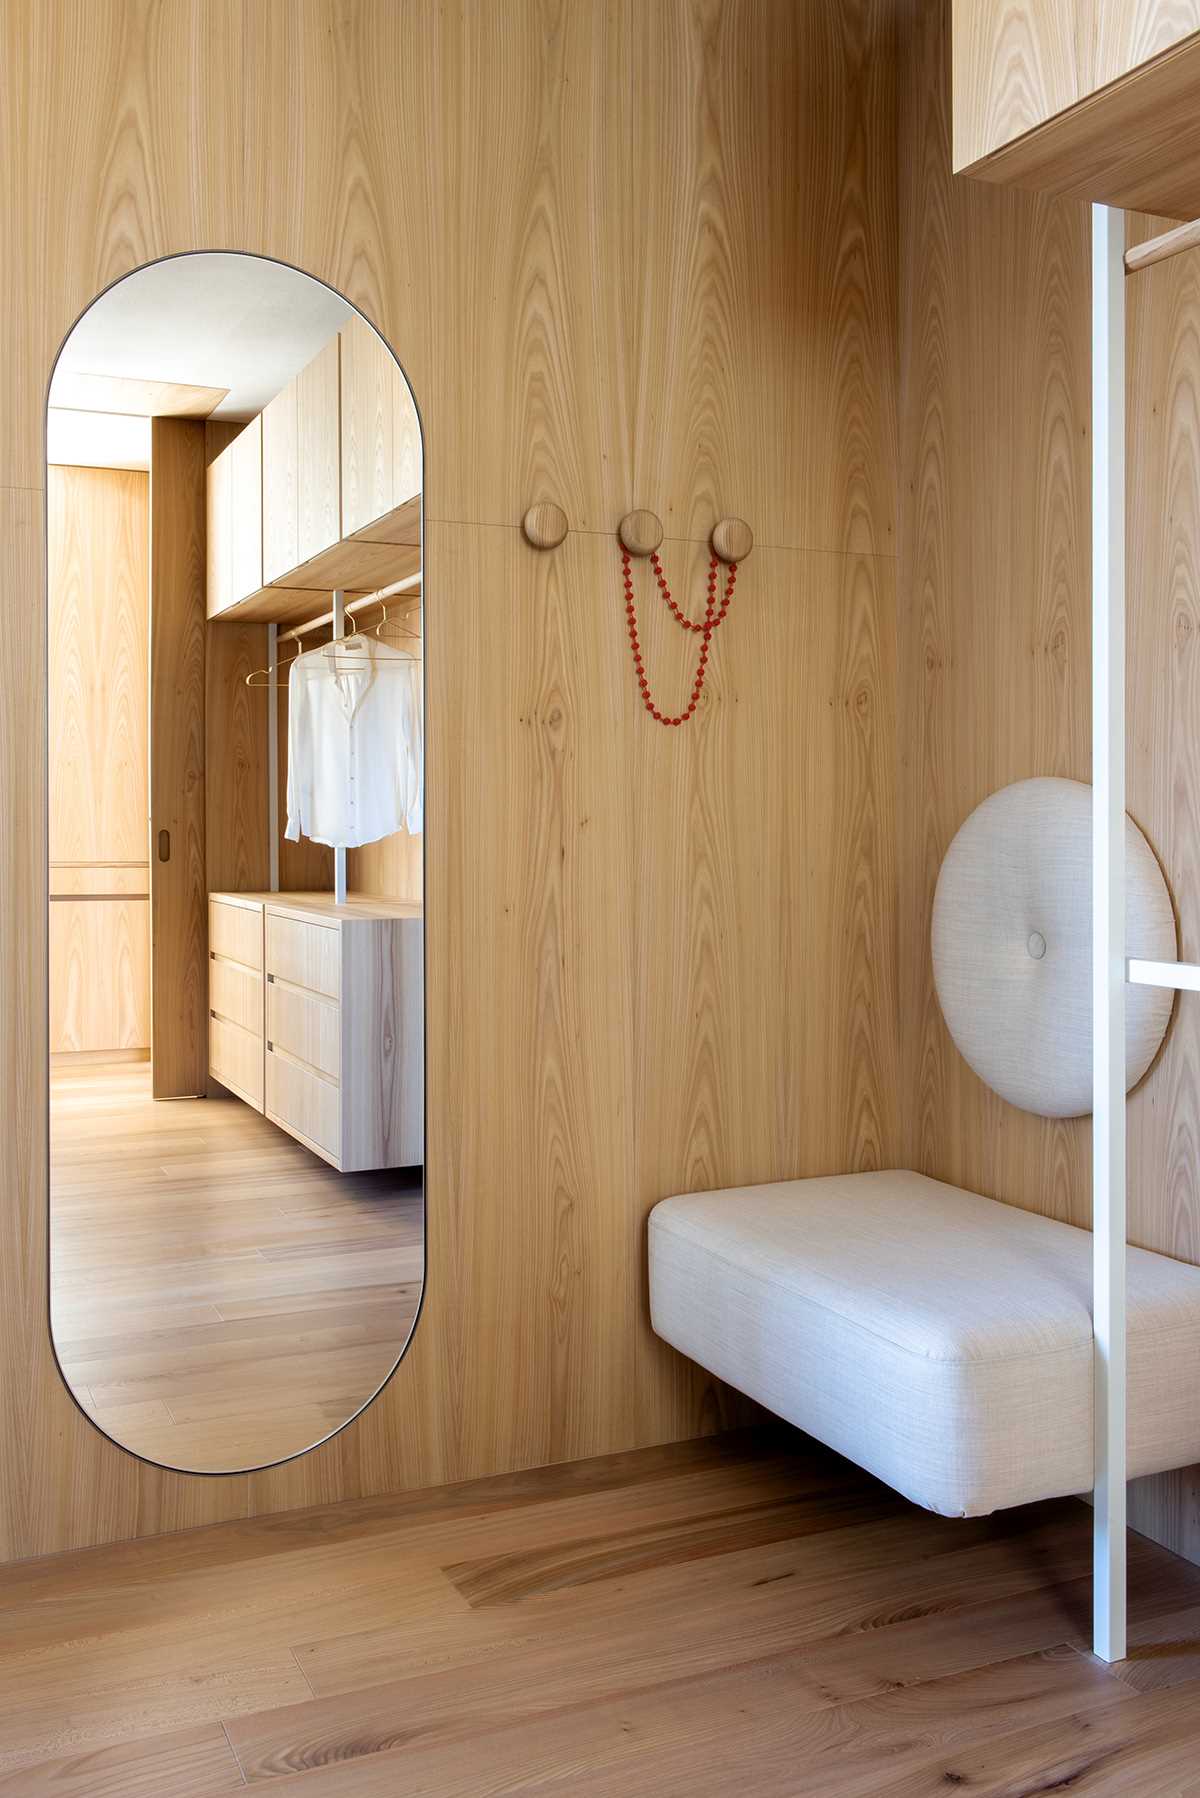 A walk-in closet lined in wood has a pill-shaped mirror that complements other arched accents found around the home.